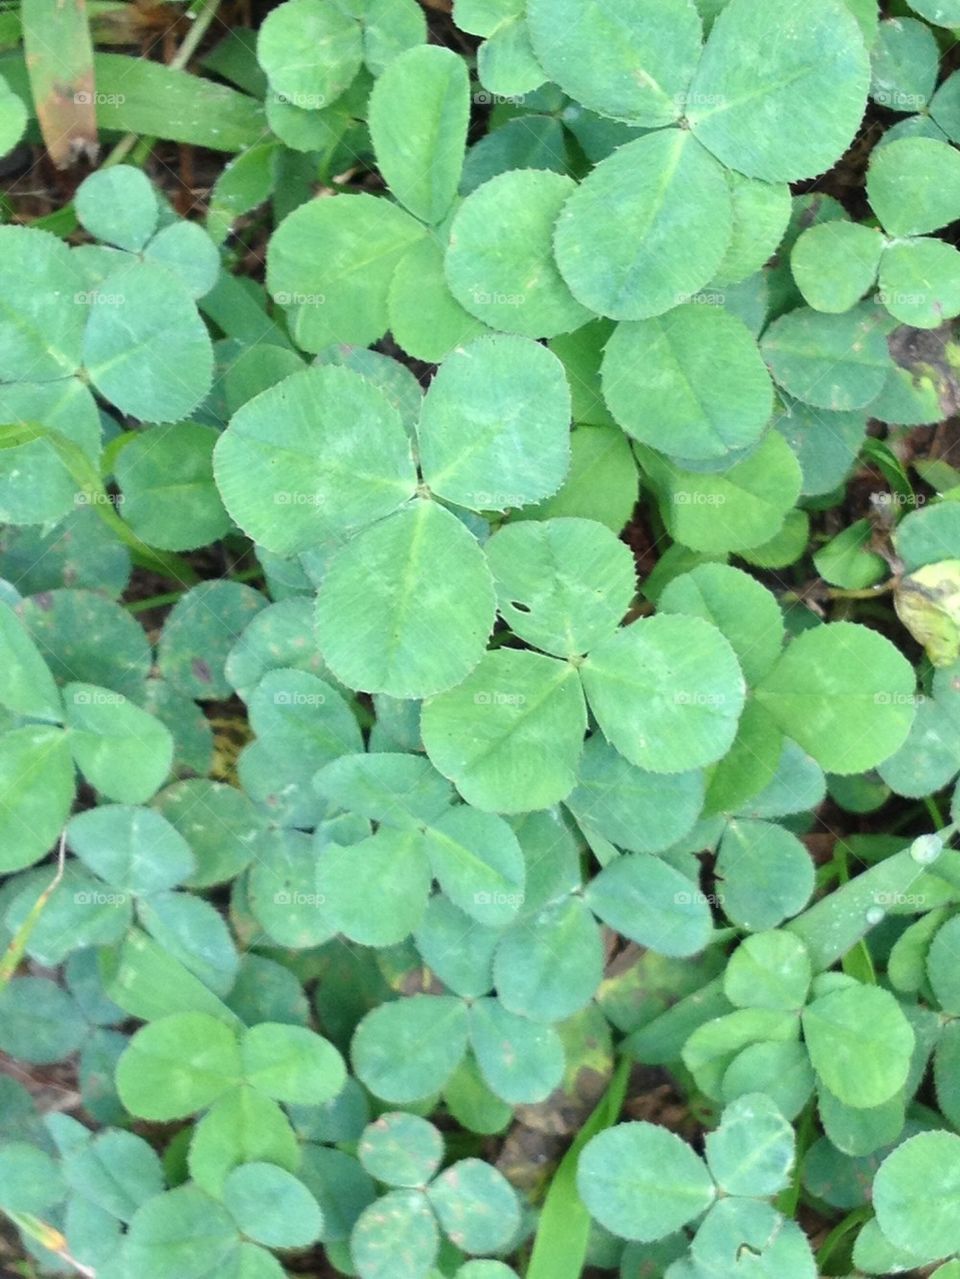 Clover patch